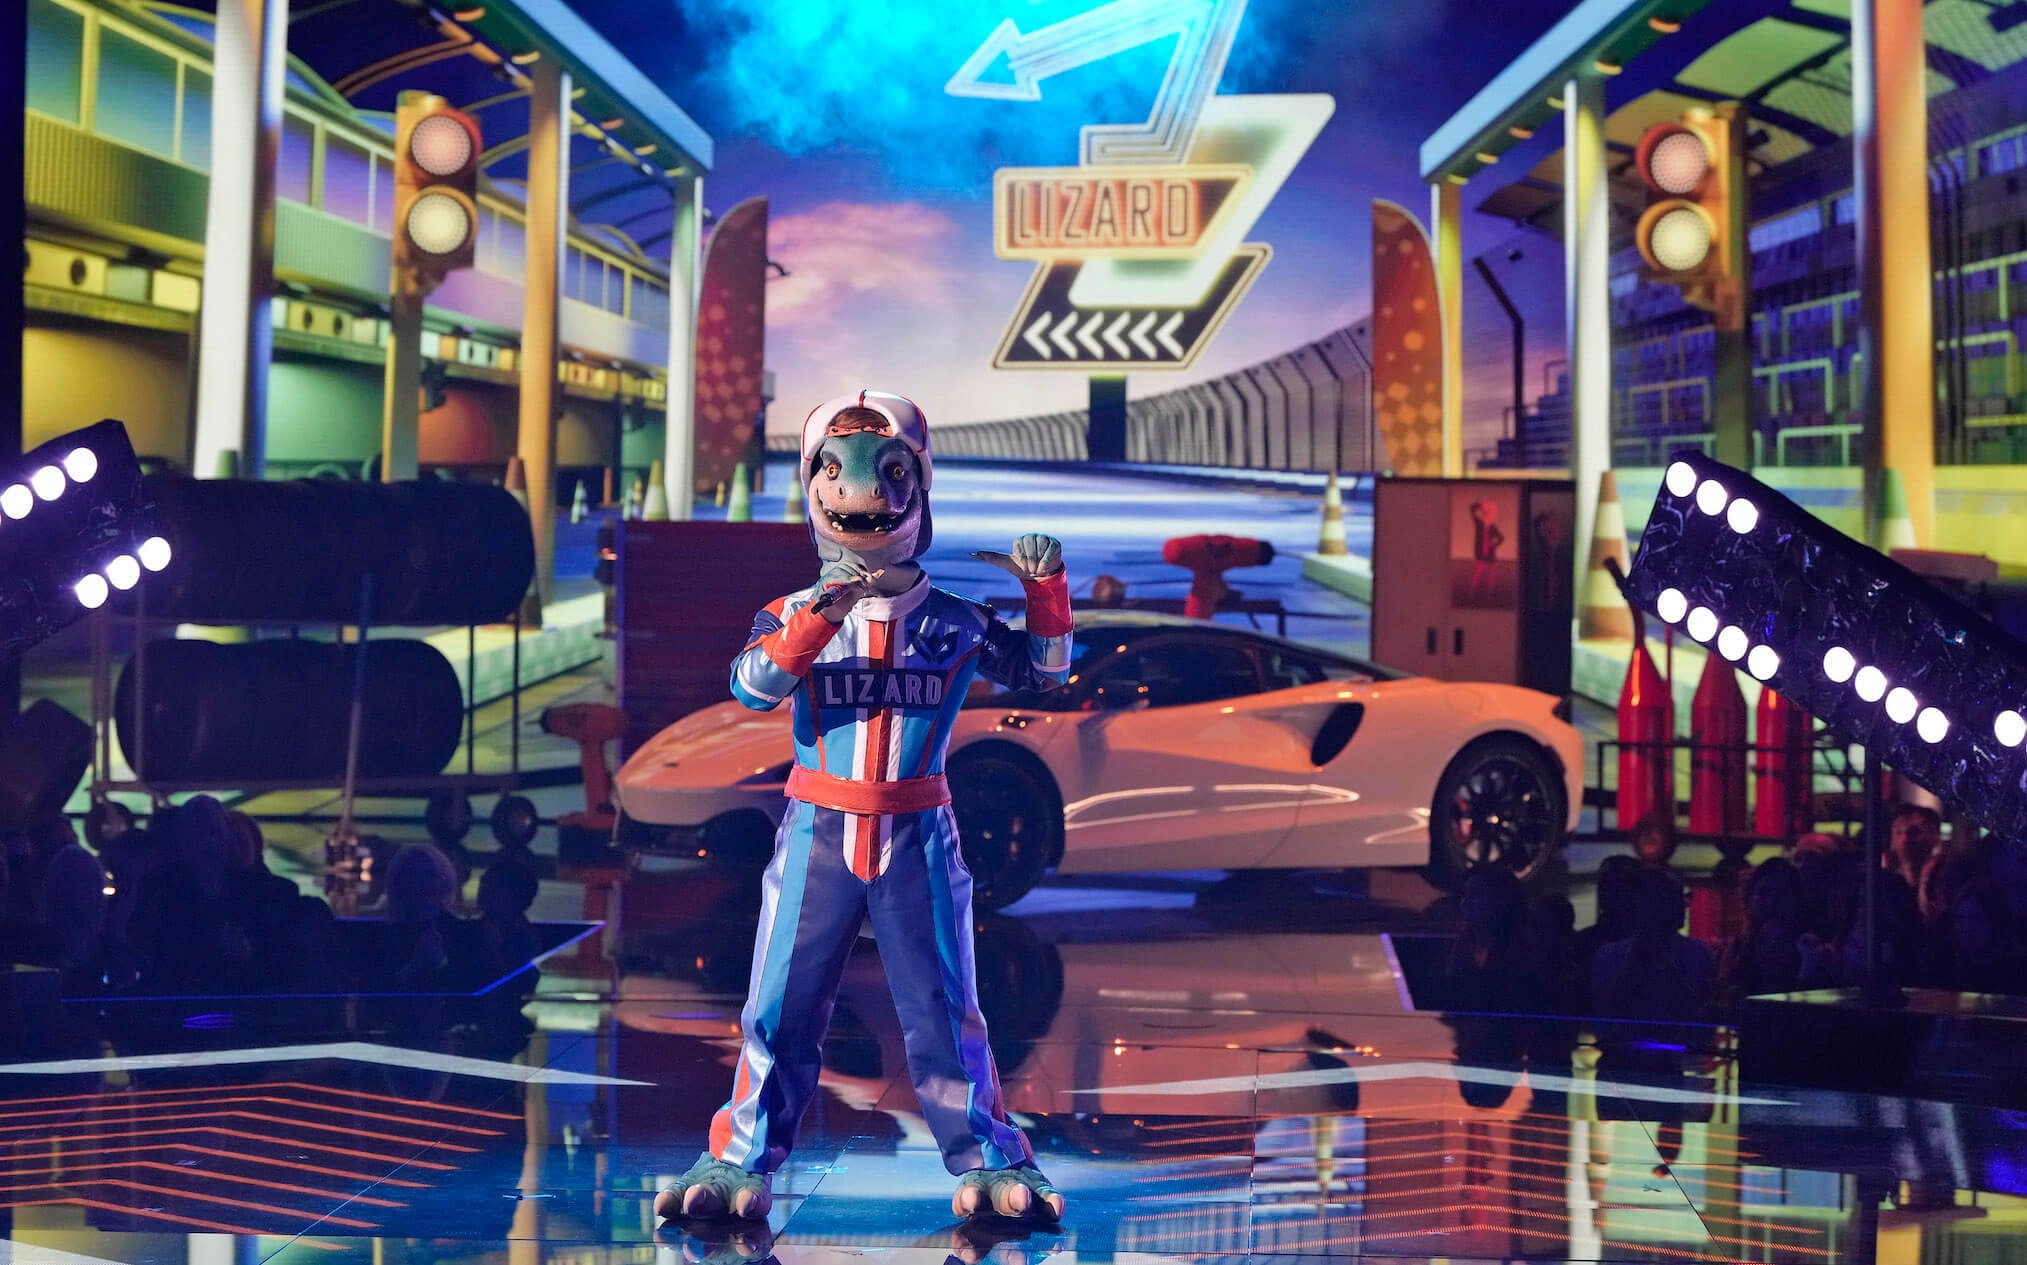 'The Masked Singer' Season 11 Group C mask Lizard on stage in front of a car